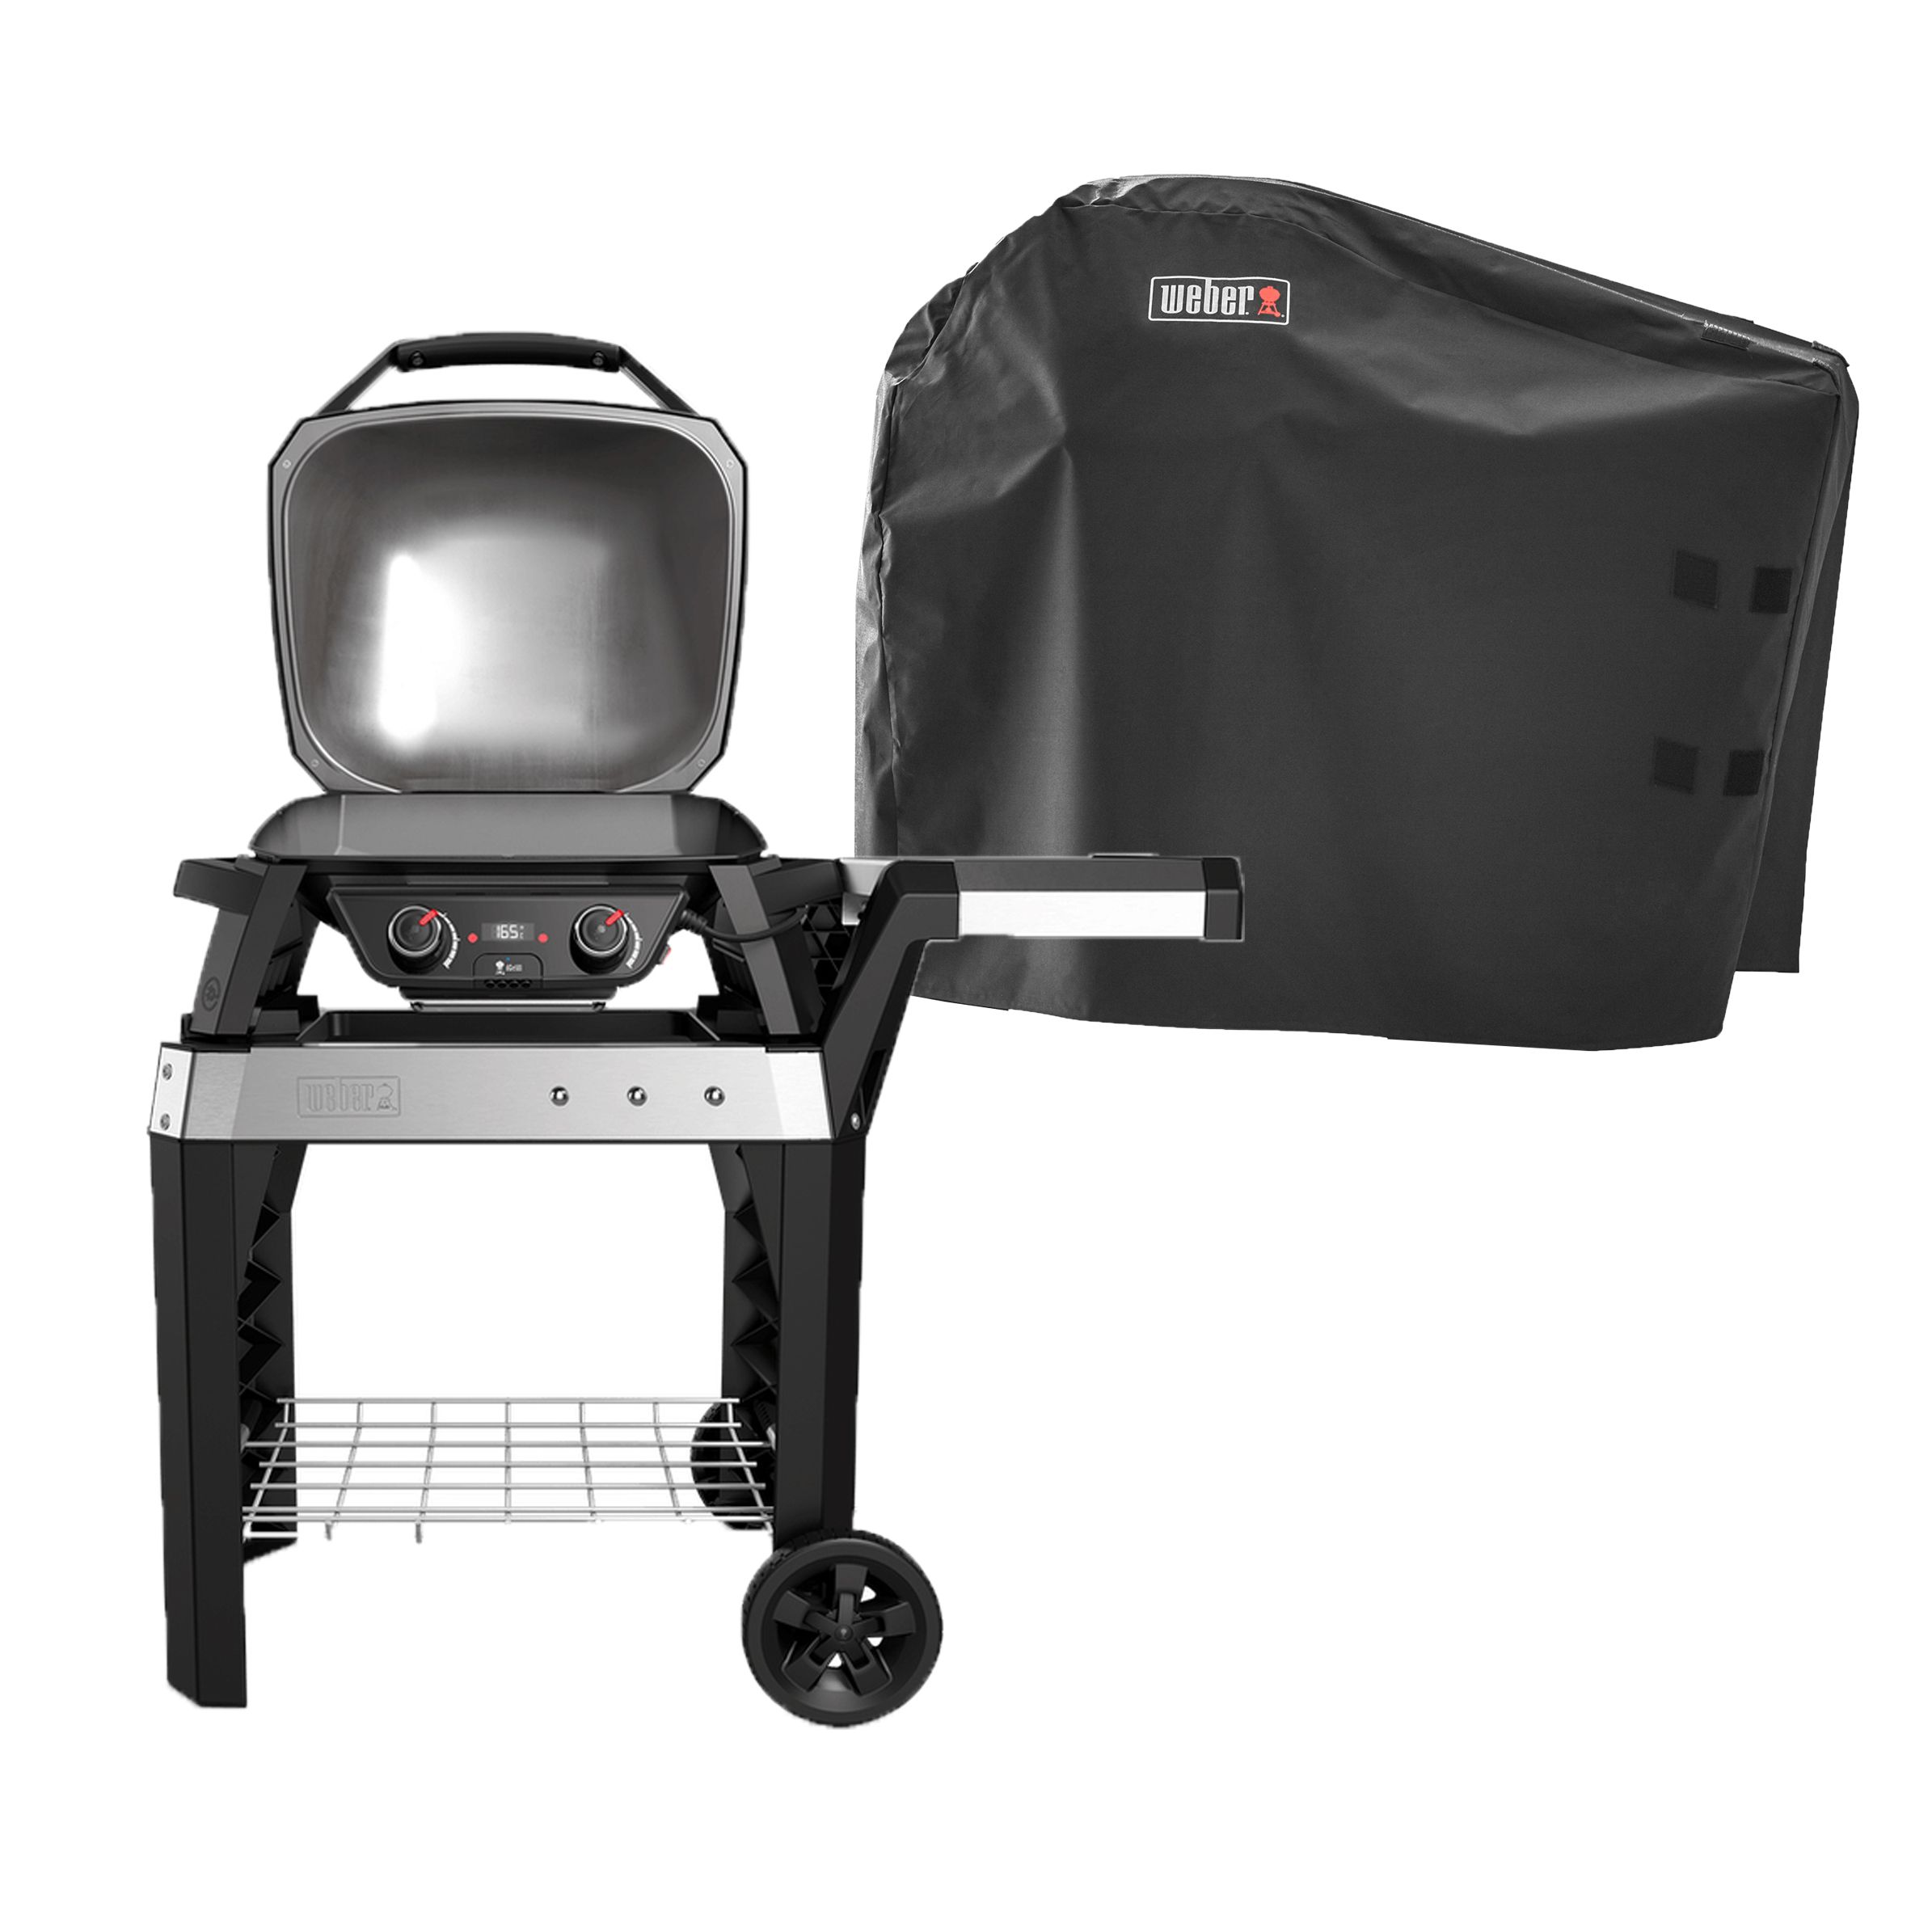 diepvries Ontwaken Embryo Weber Pulse 2000 with cart Electric Barbecue with Cover | DIY at B&Q